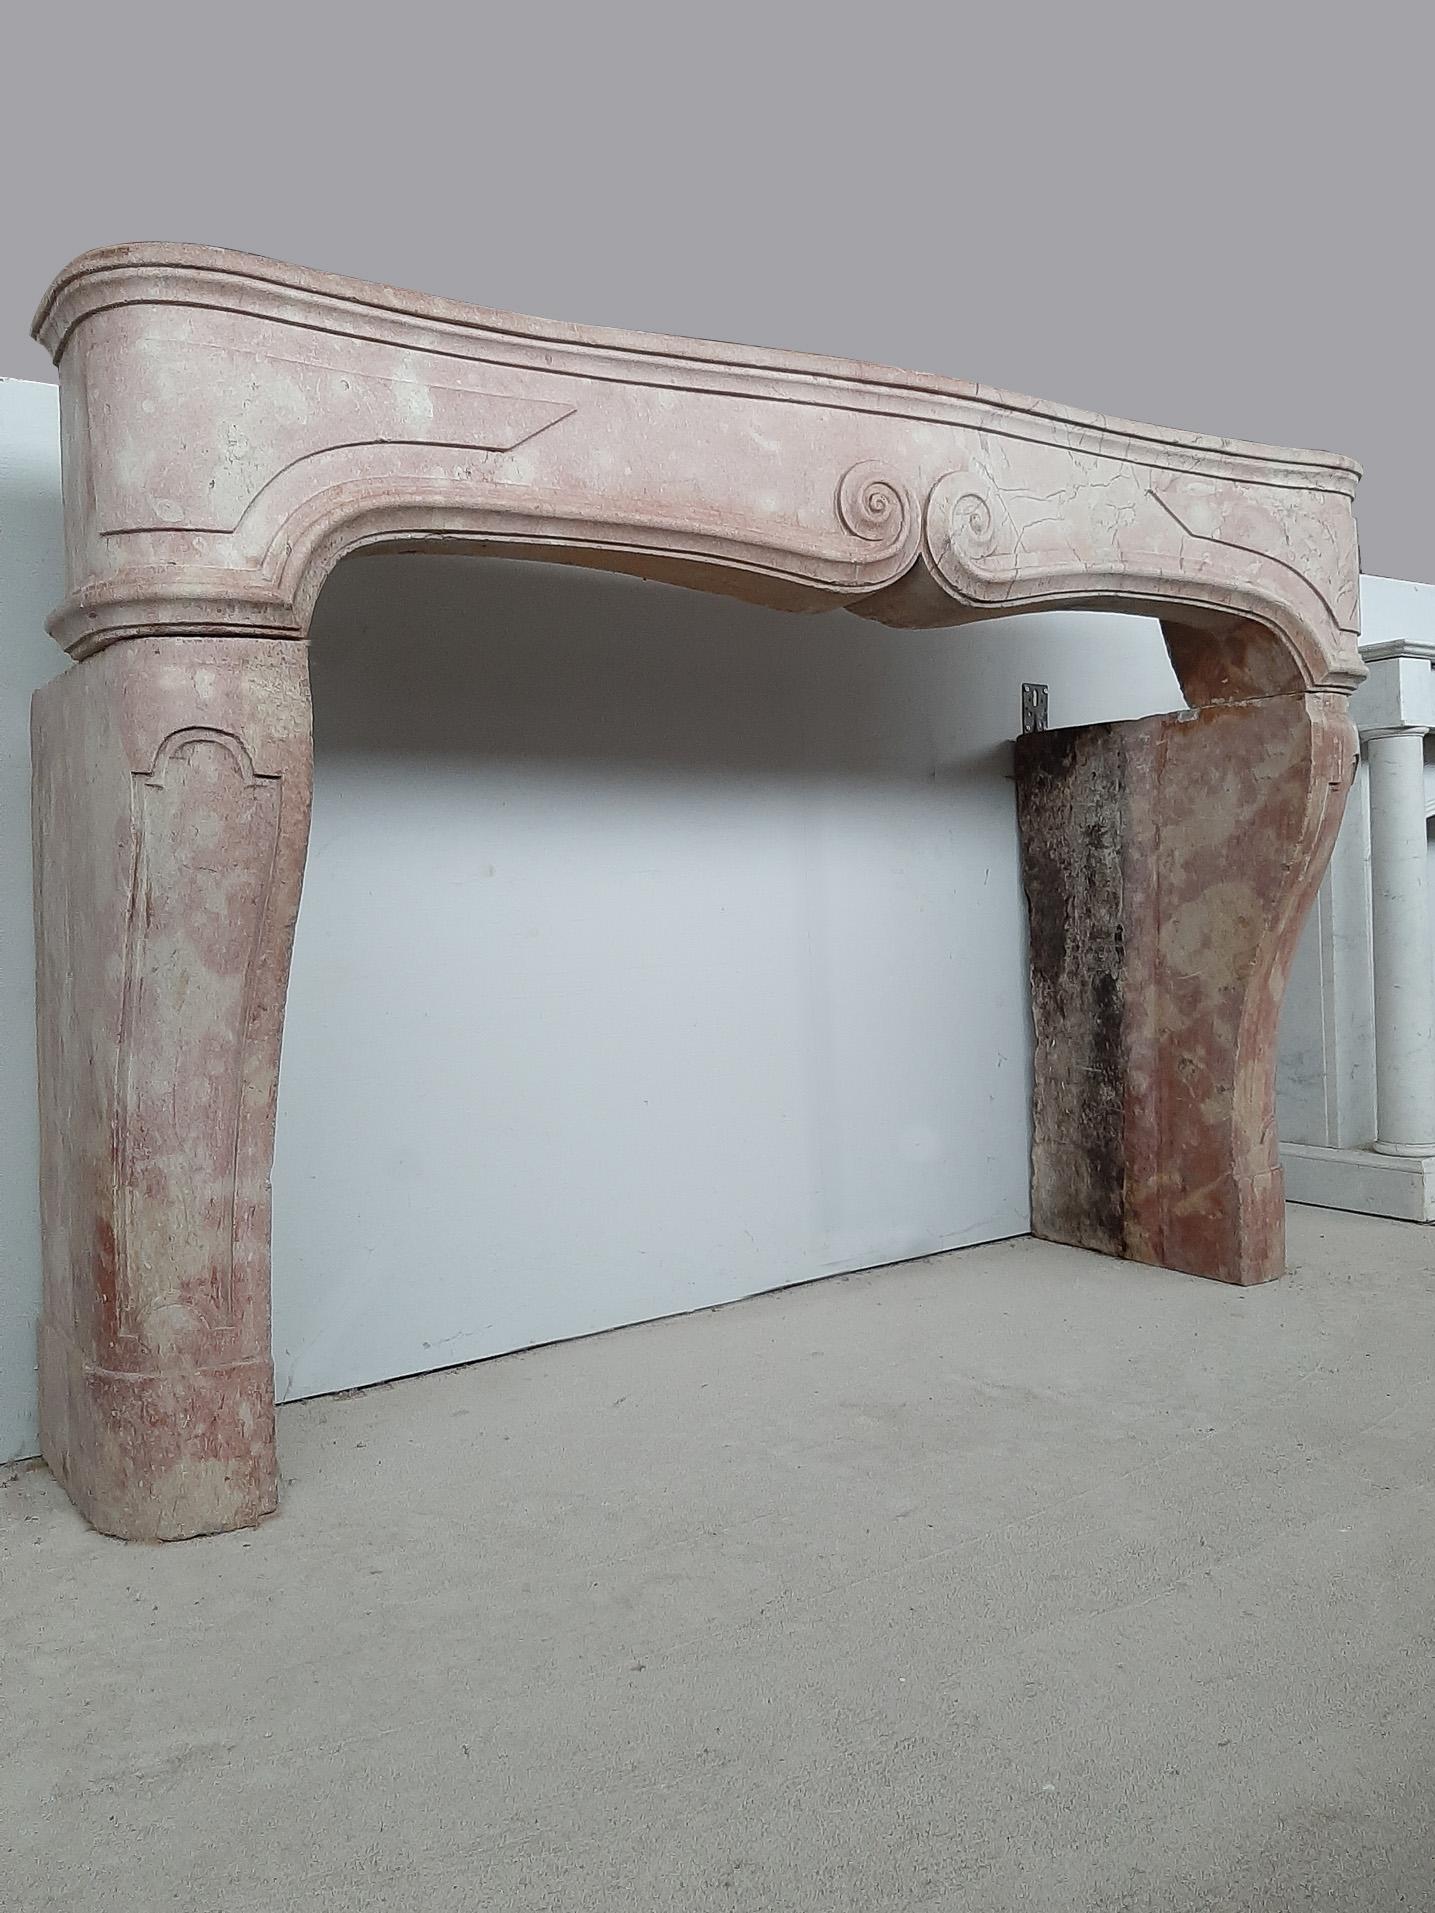 17th century Louis XIV pink marble fireplace, ± 1680. Antique French Burgundian mantelpiece with a decorative brace in the frieze and with panels in the legs.

Dimensions: H 122 x W 180 x D 55 cm, depth at the top 29 cm
Inner dimensions: H 95 x